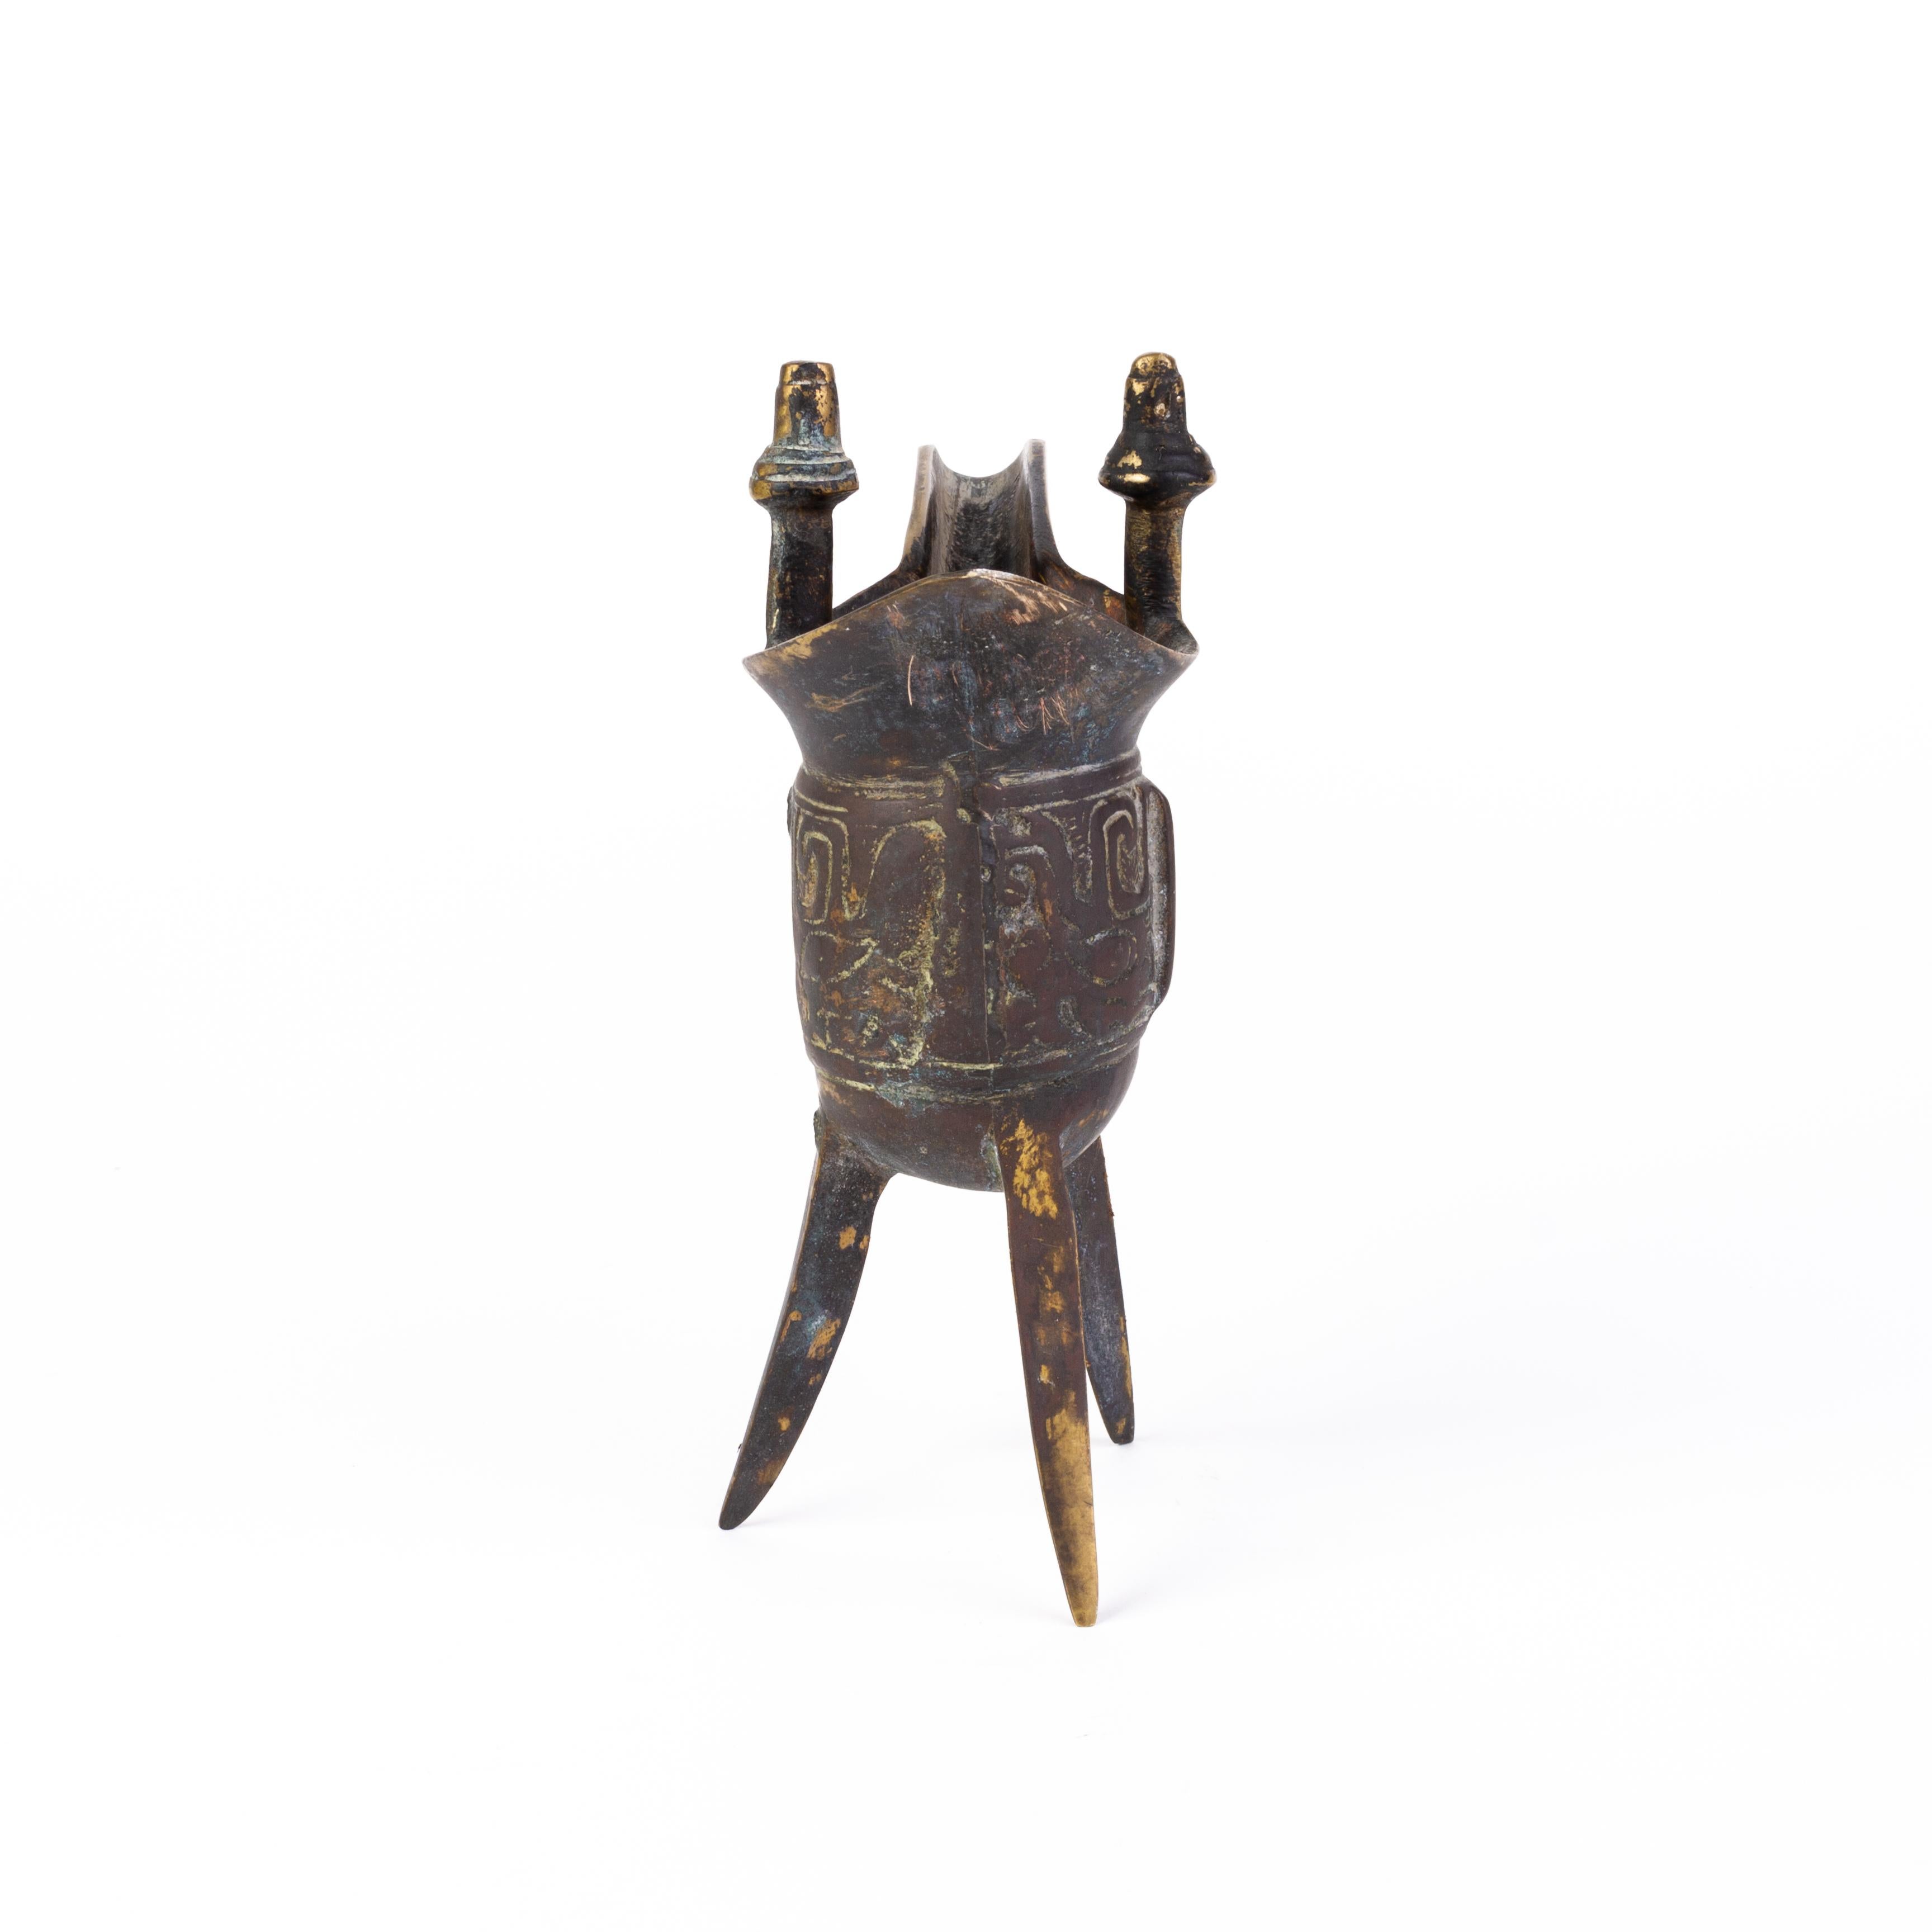 Early 20th century Archaist Chinese bronze Jue ritual vessel.
From a private collection.
Free international shipping.